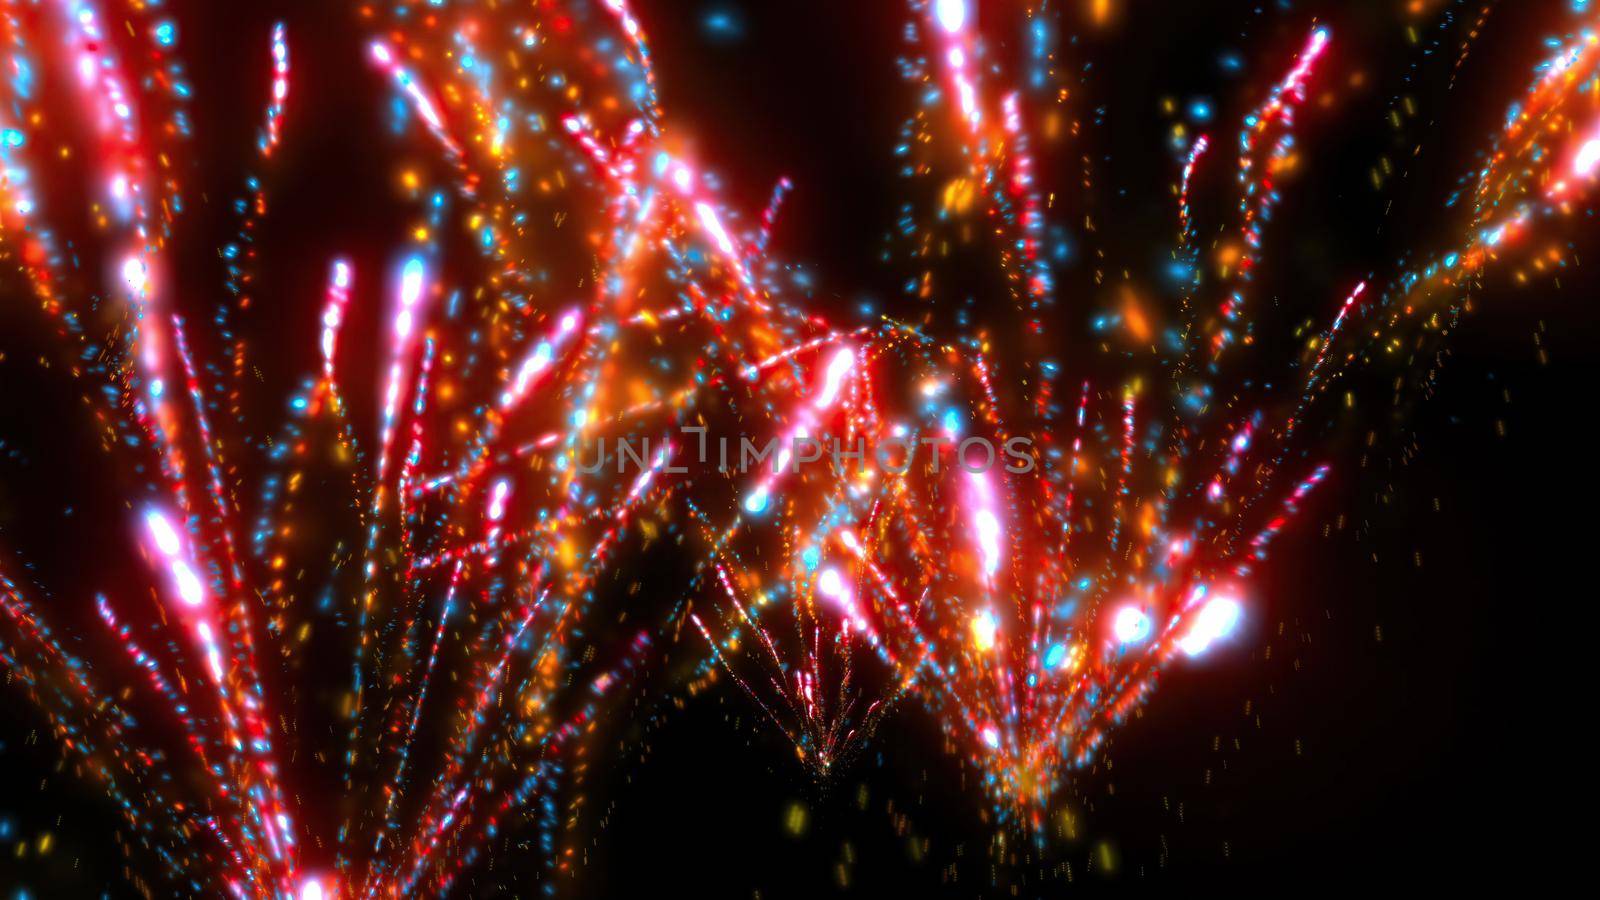 3d illustration - Magic Fireworks with particles and sparks on black background  by vitanovski